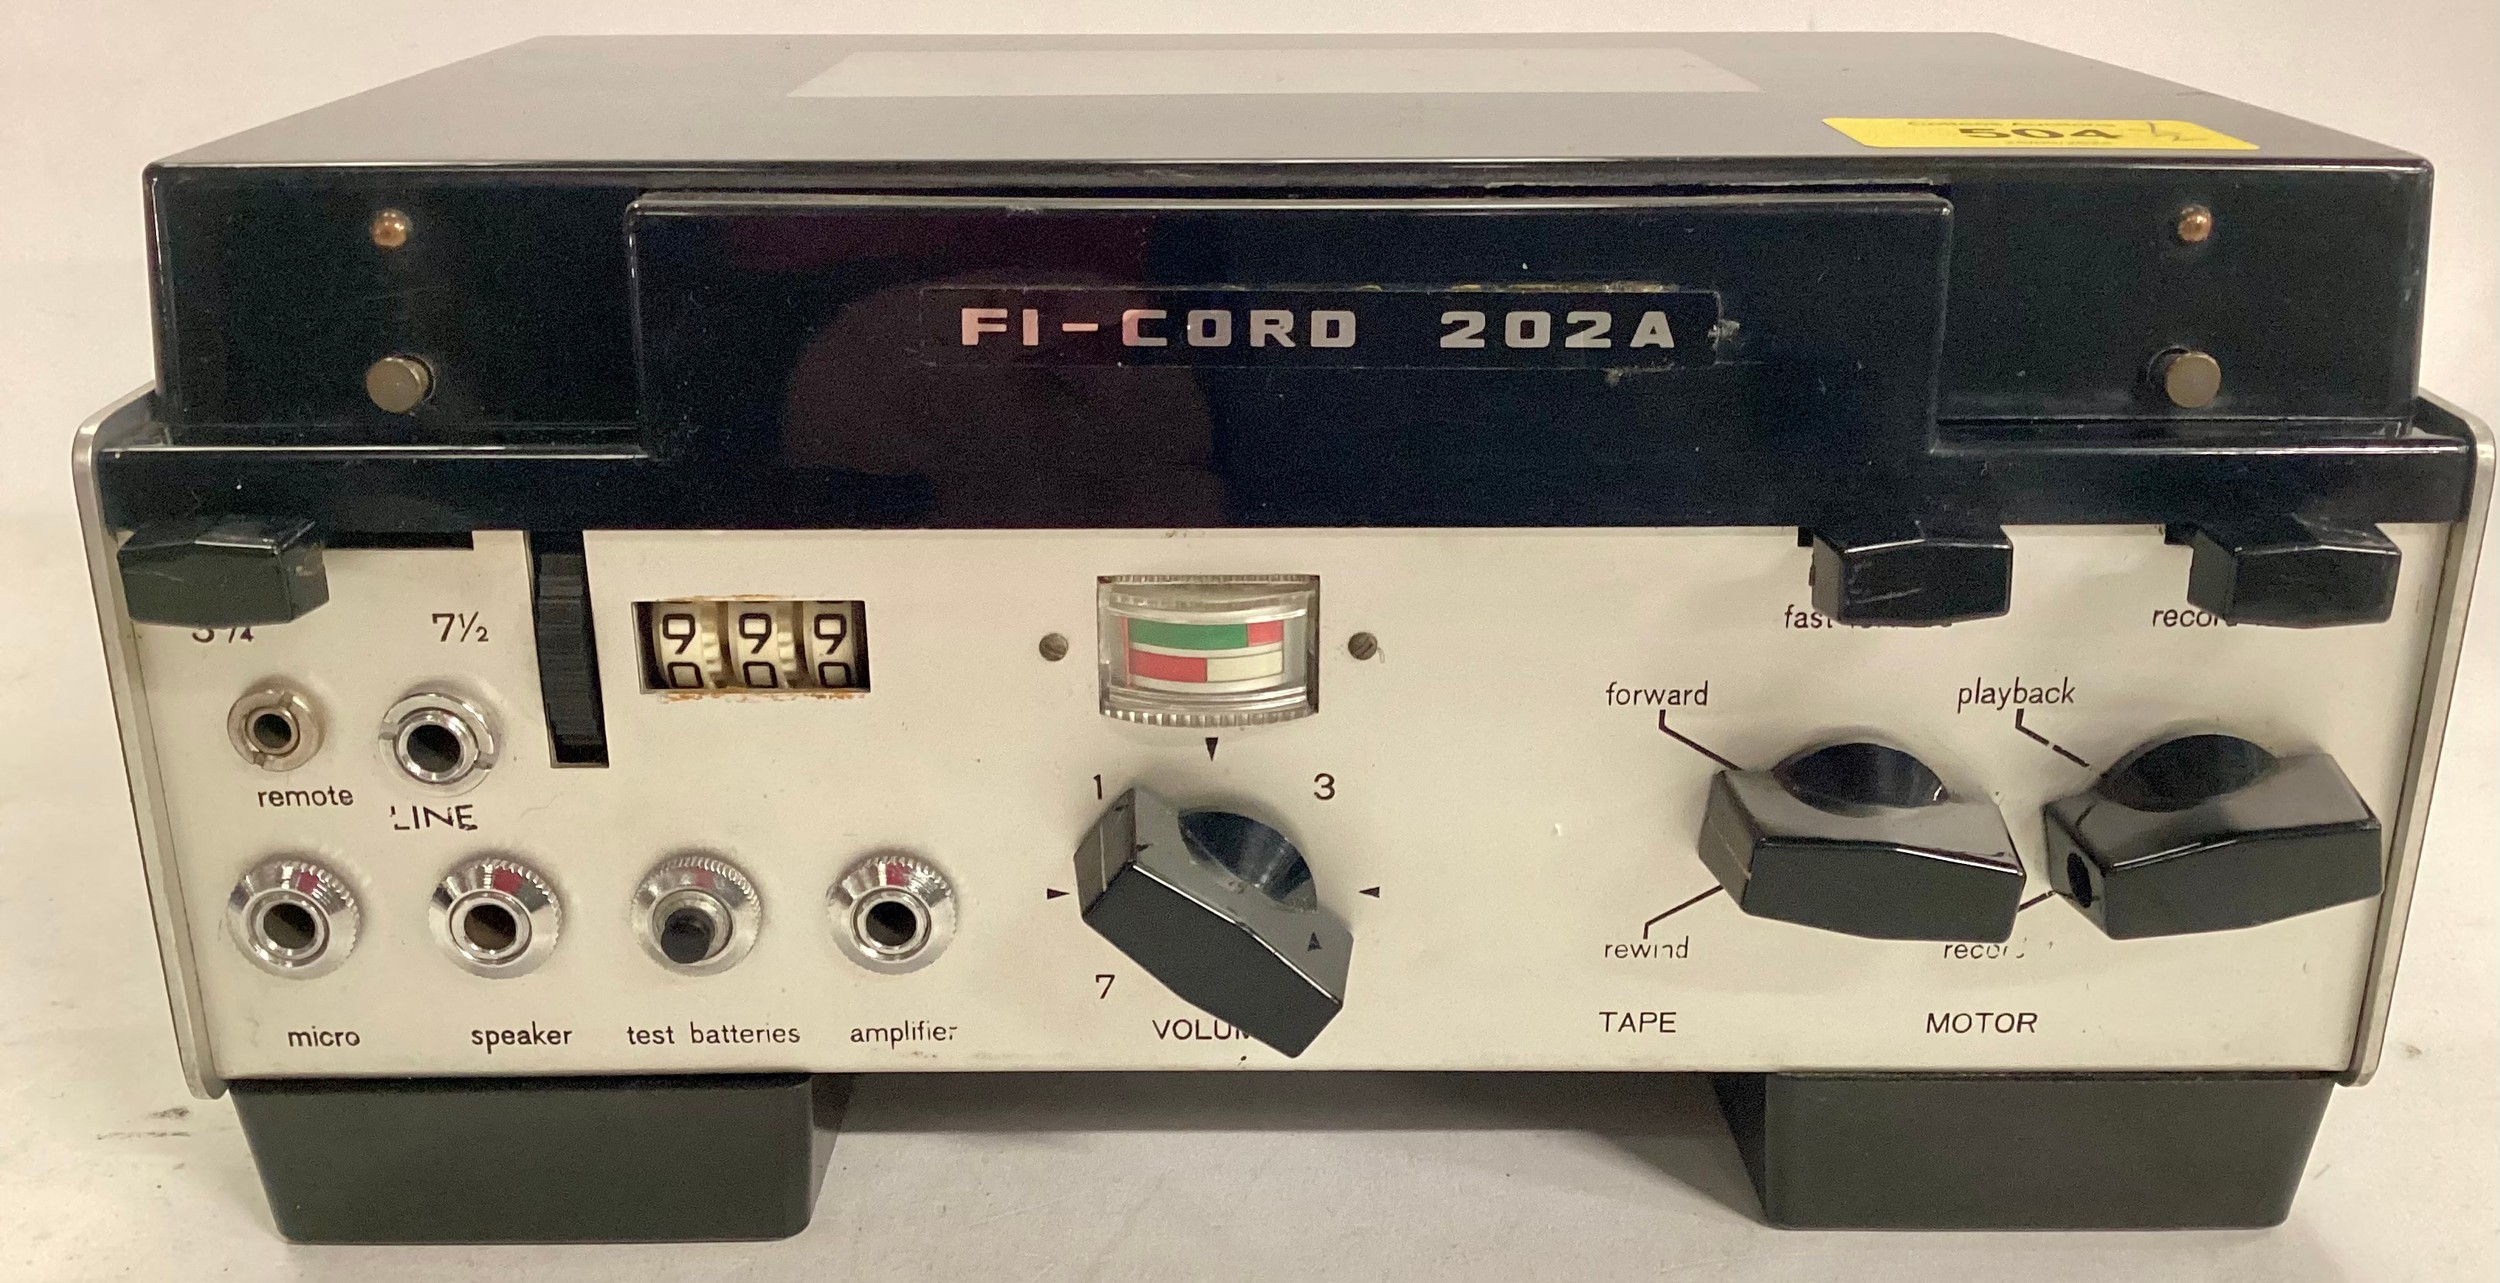 FI-CORD PORTABLE REEL TO REEL TAPE RECORDERS. Here we have 2 tape recorders model No. 202A. One - Image 6 of 8